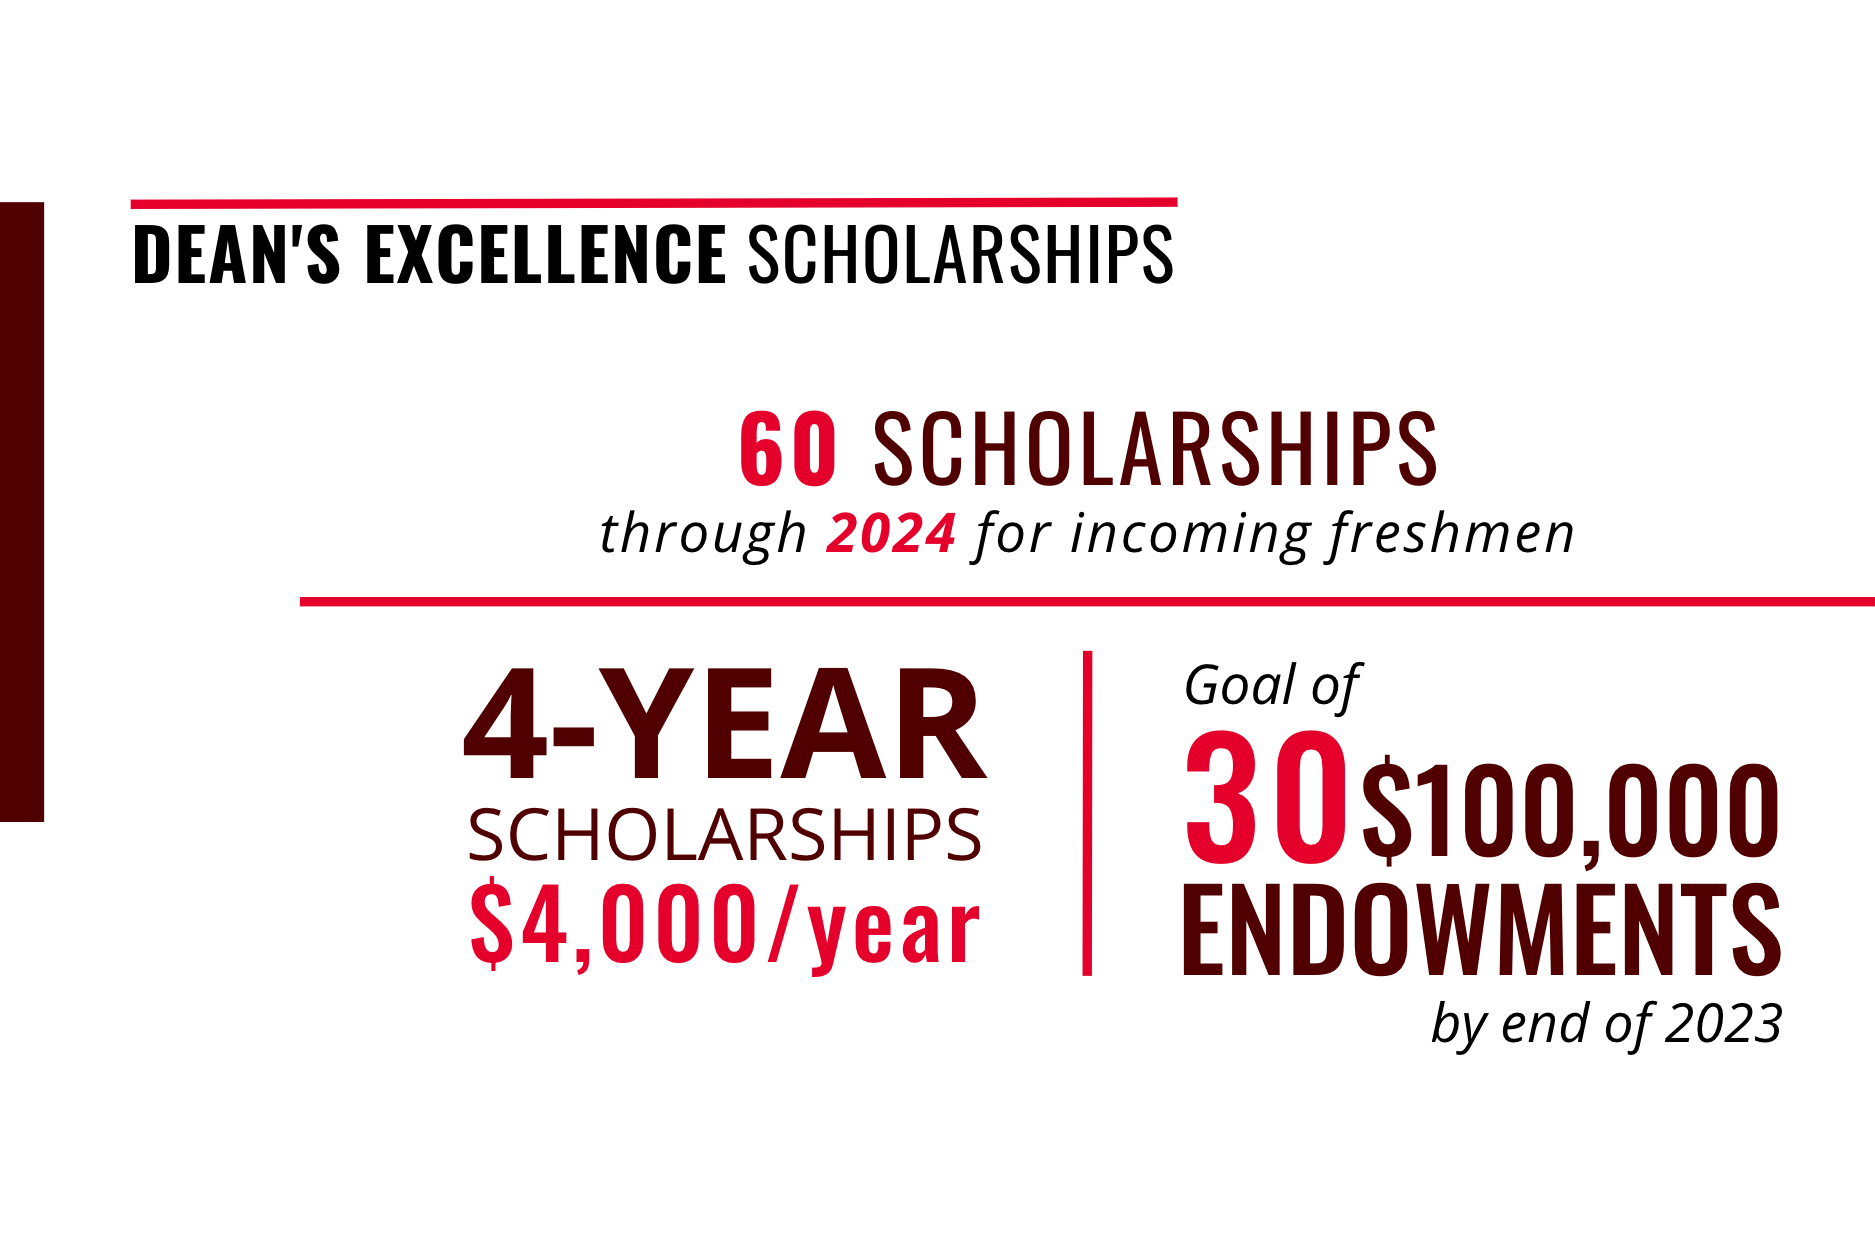 Dean's excellence scholarship information panel. The panel explains that the program offers 60 scholarships through 2024 for incoming freshman. The four-year scholarships are $4,000 per year. And the program has a goal of 30 $100,000 endowments by the end of 2023.